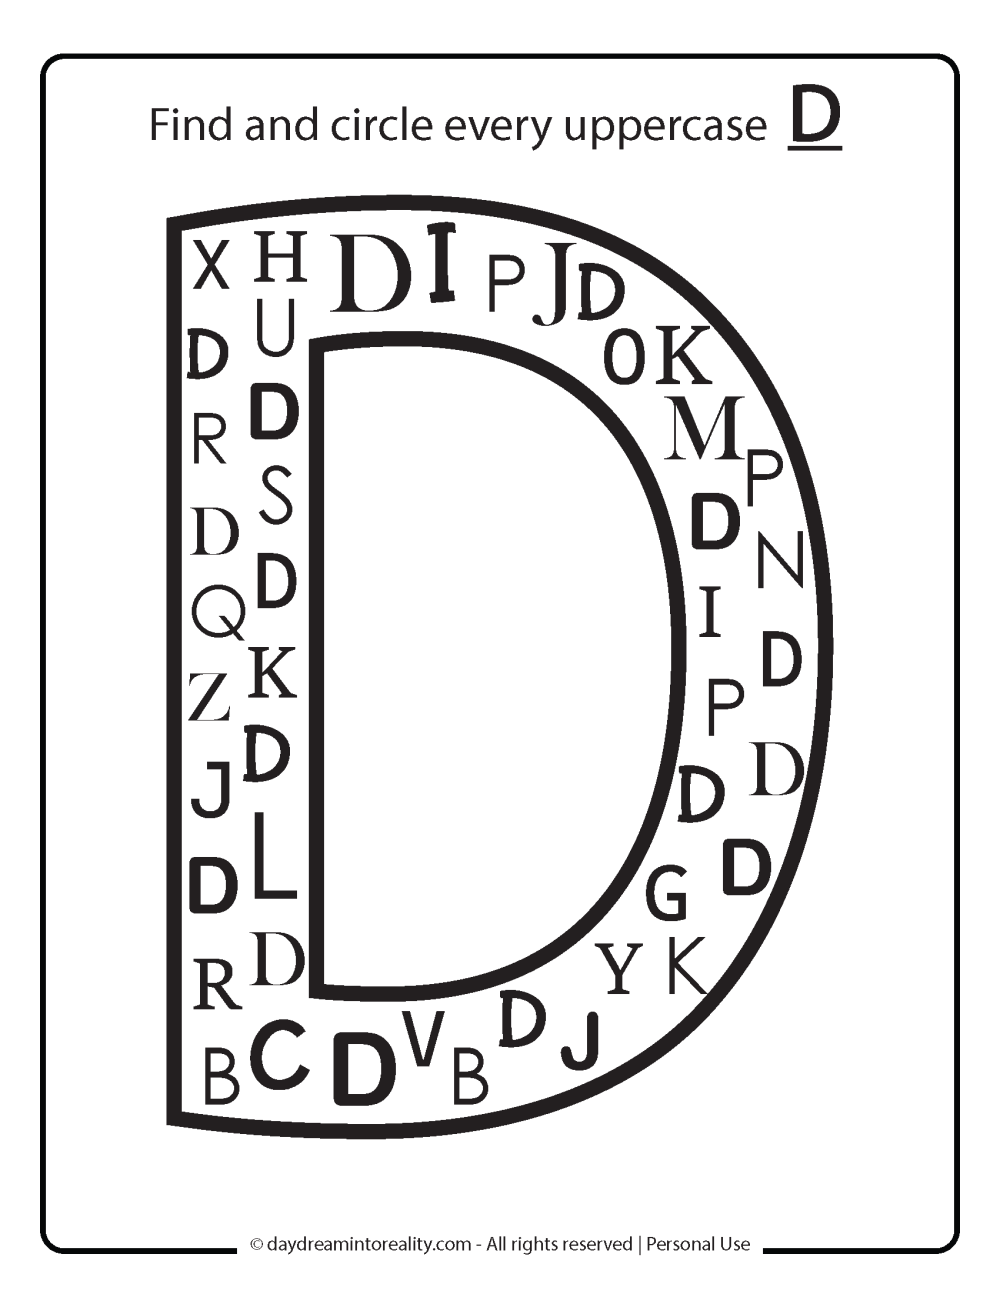 Letter D worksheet free printables - find and circle all uppercase D.